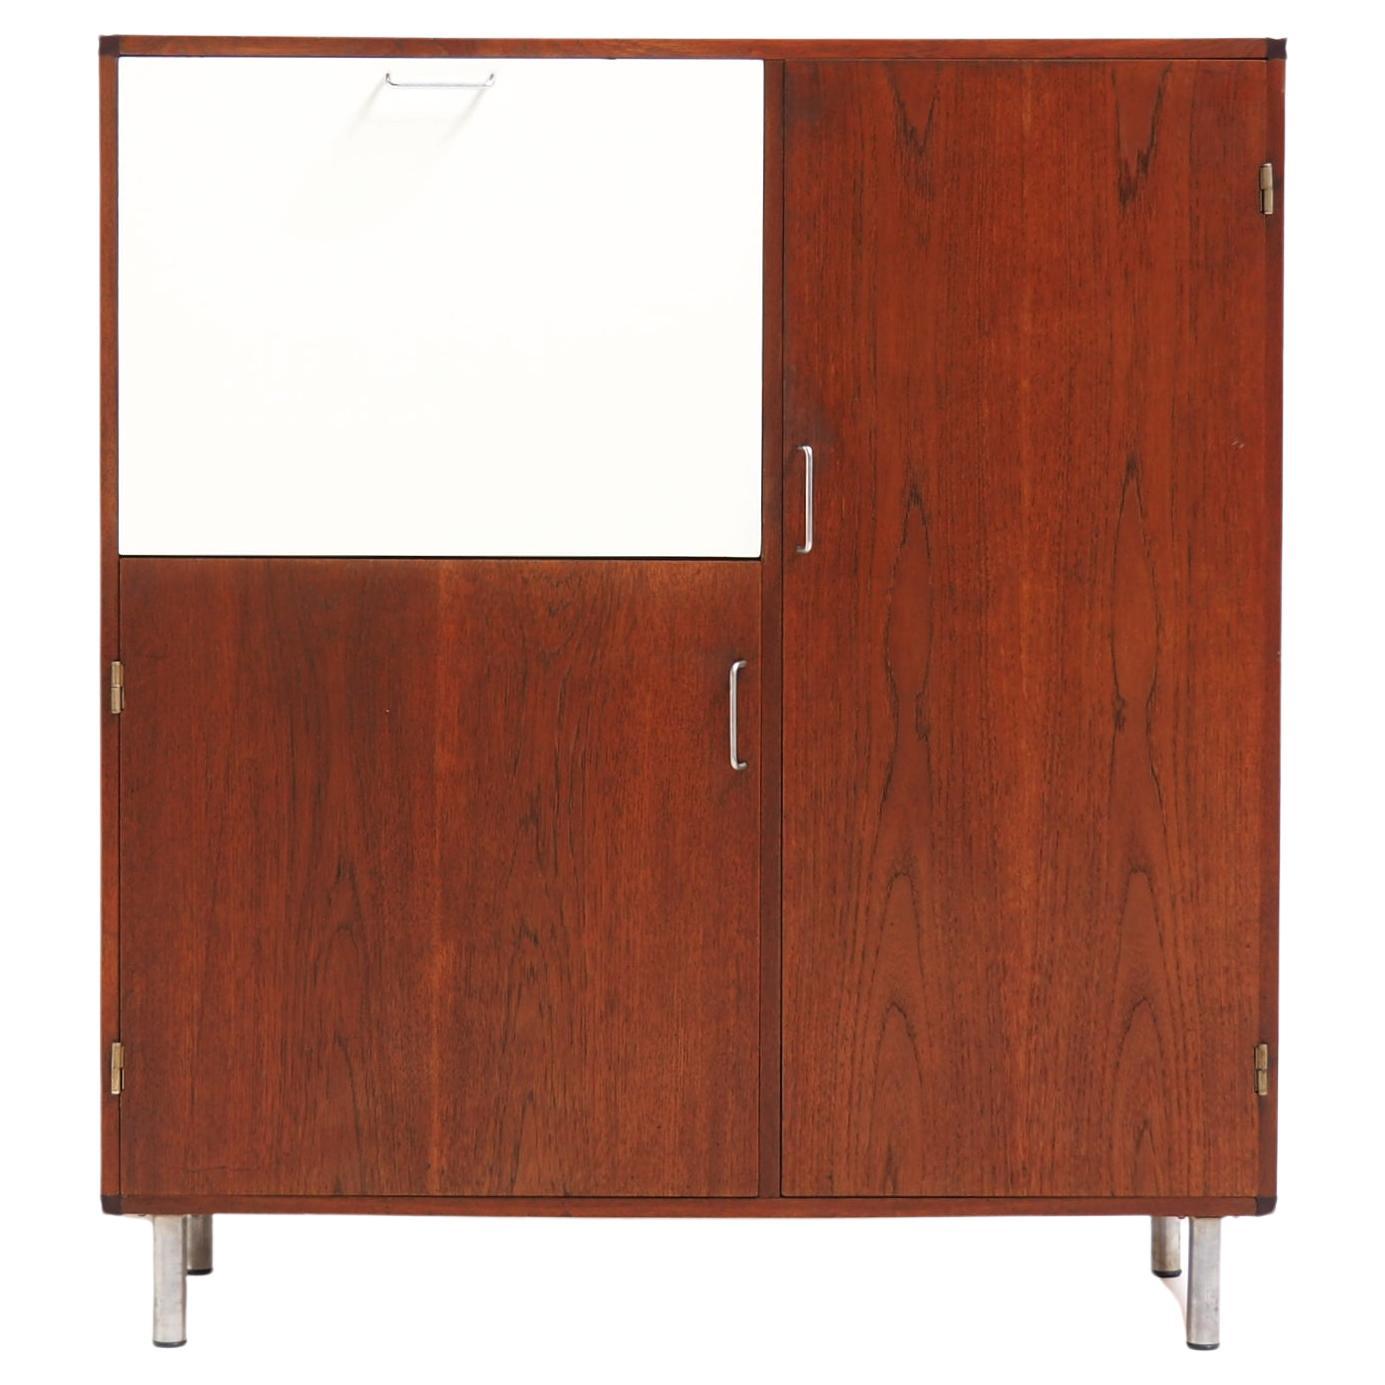 Pastoe ‘Made to Measure’ Bar Cabinet Designed by Cees Braakman